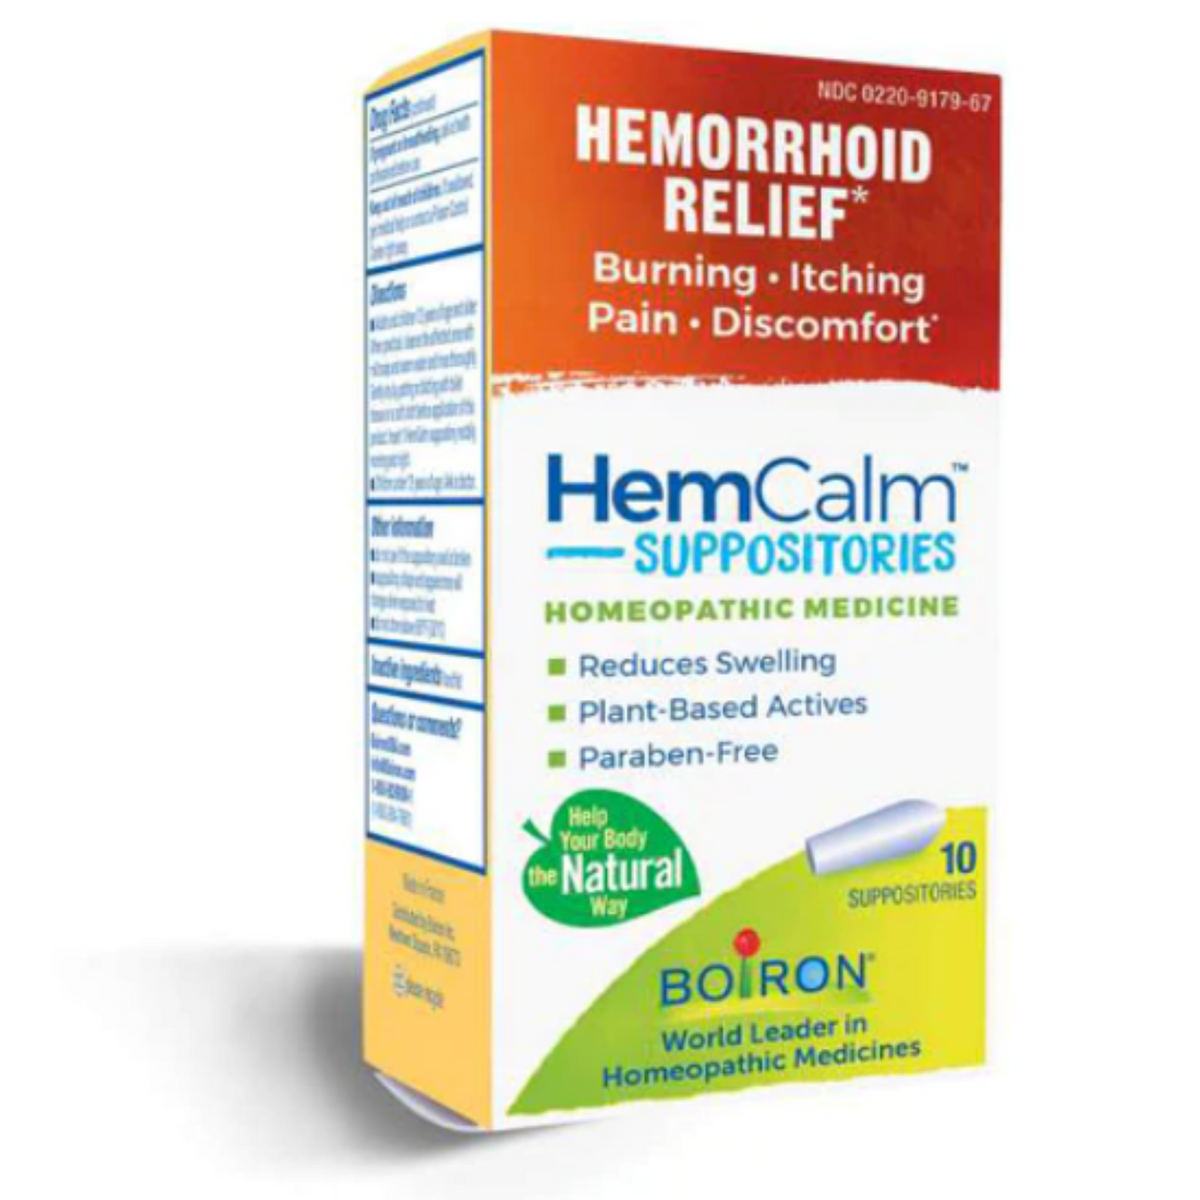 Primary image of HemCalm Suppositories